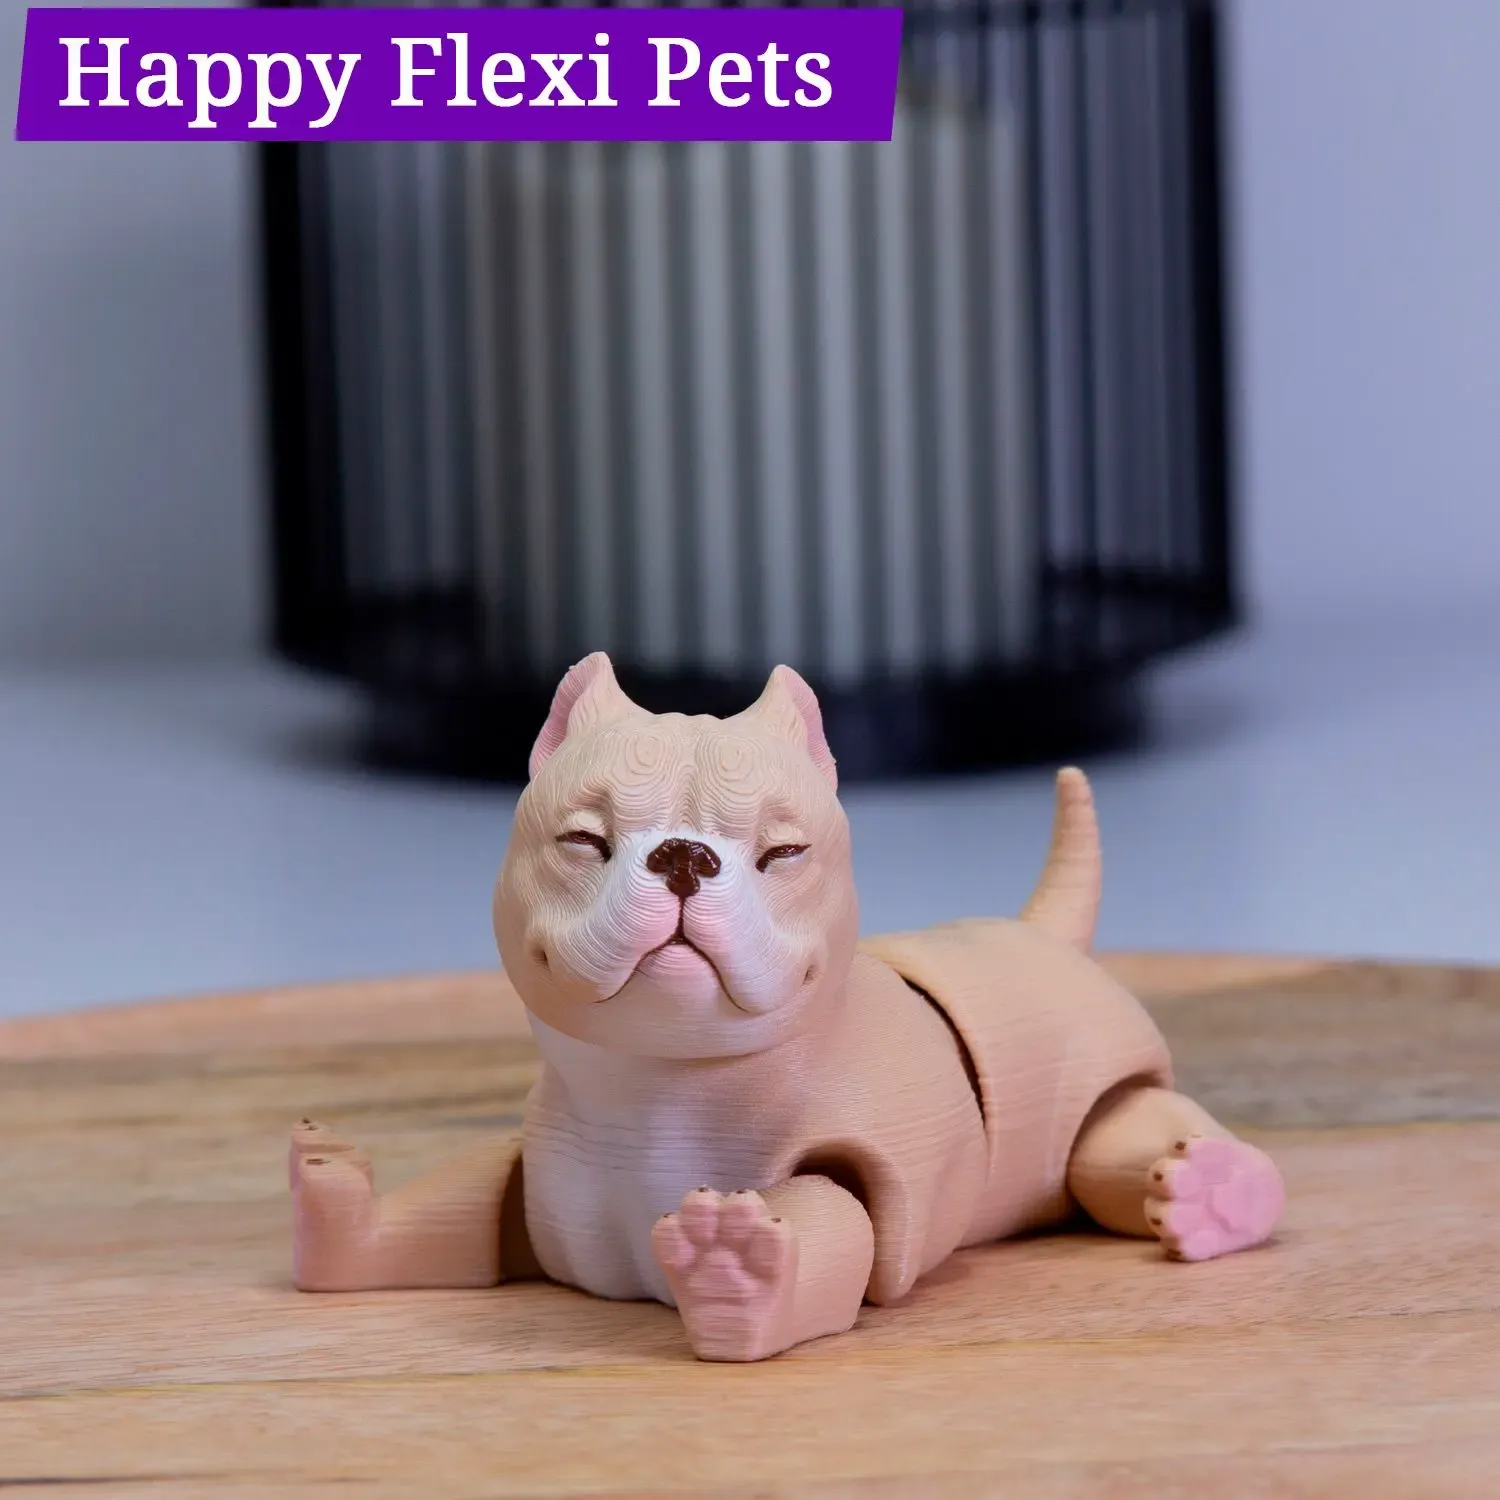 American Bully dog articulated toy by Happy Flexi Pets